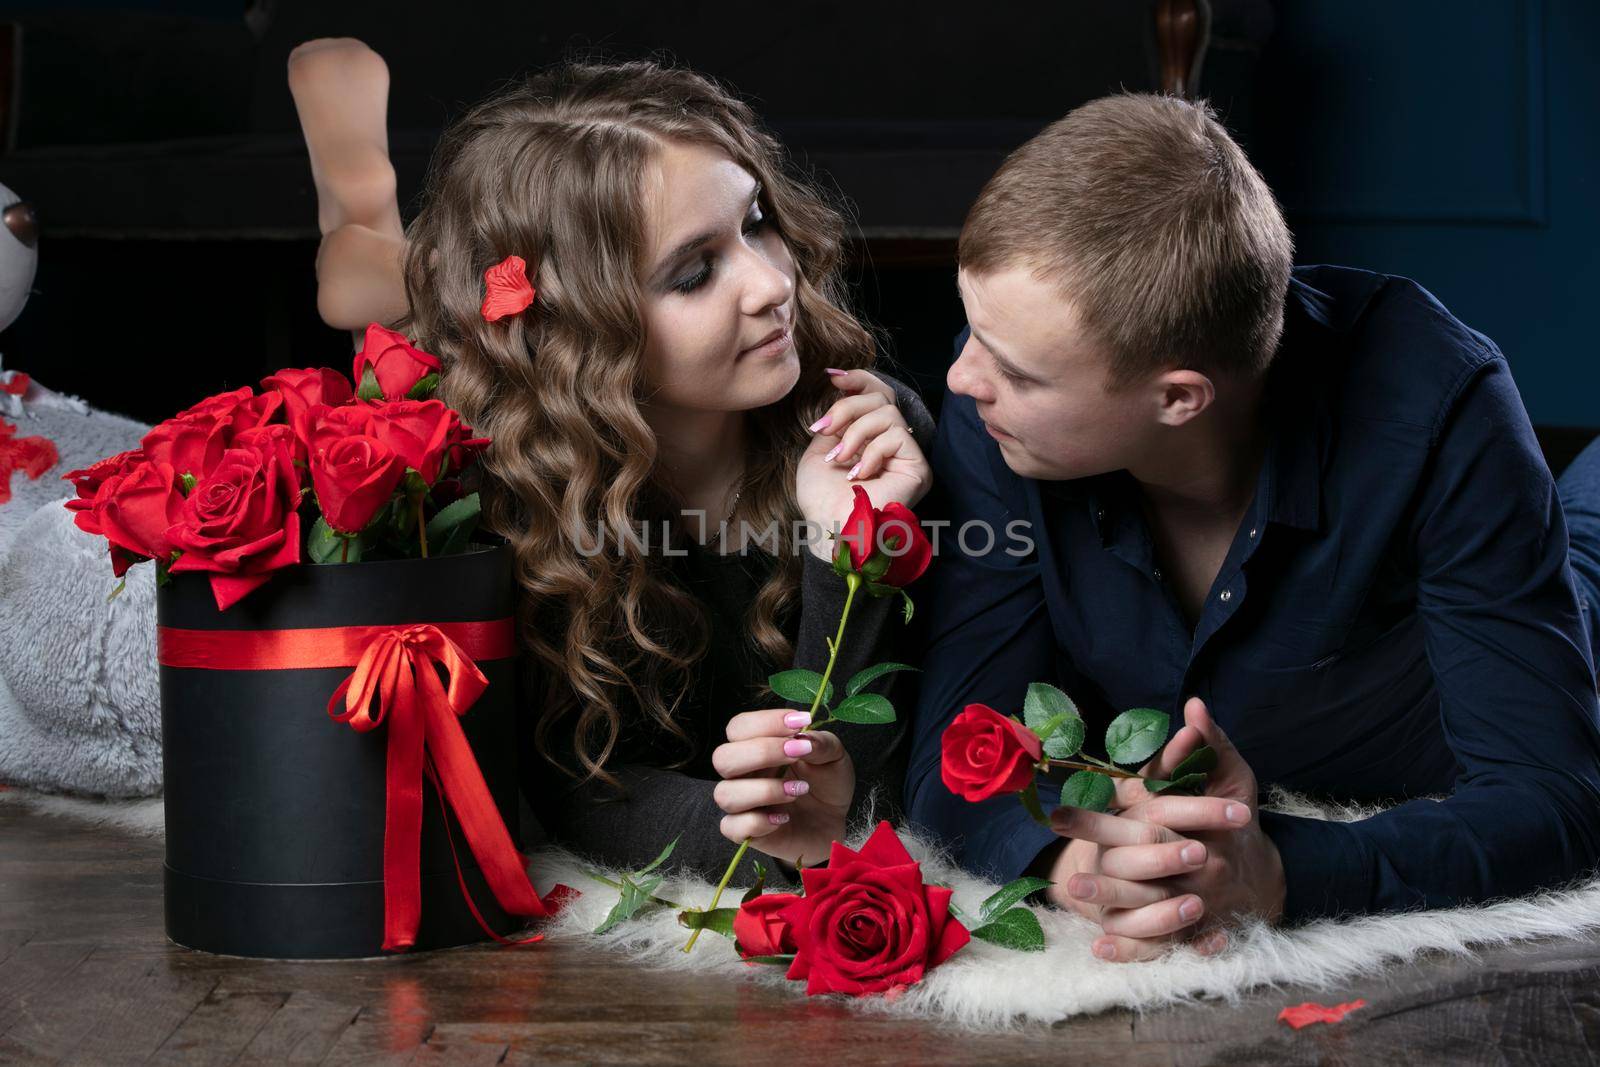 Beautiful young couple at home. Hugs, kisses and enjoys spending time together, celebrating Valentine's Day with red roses.